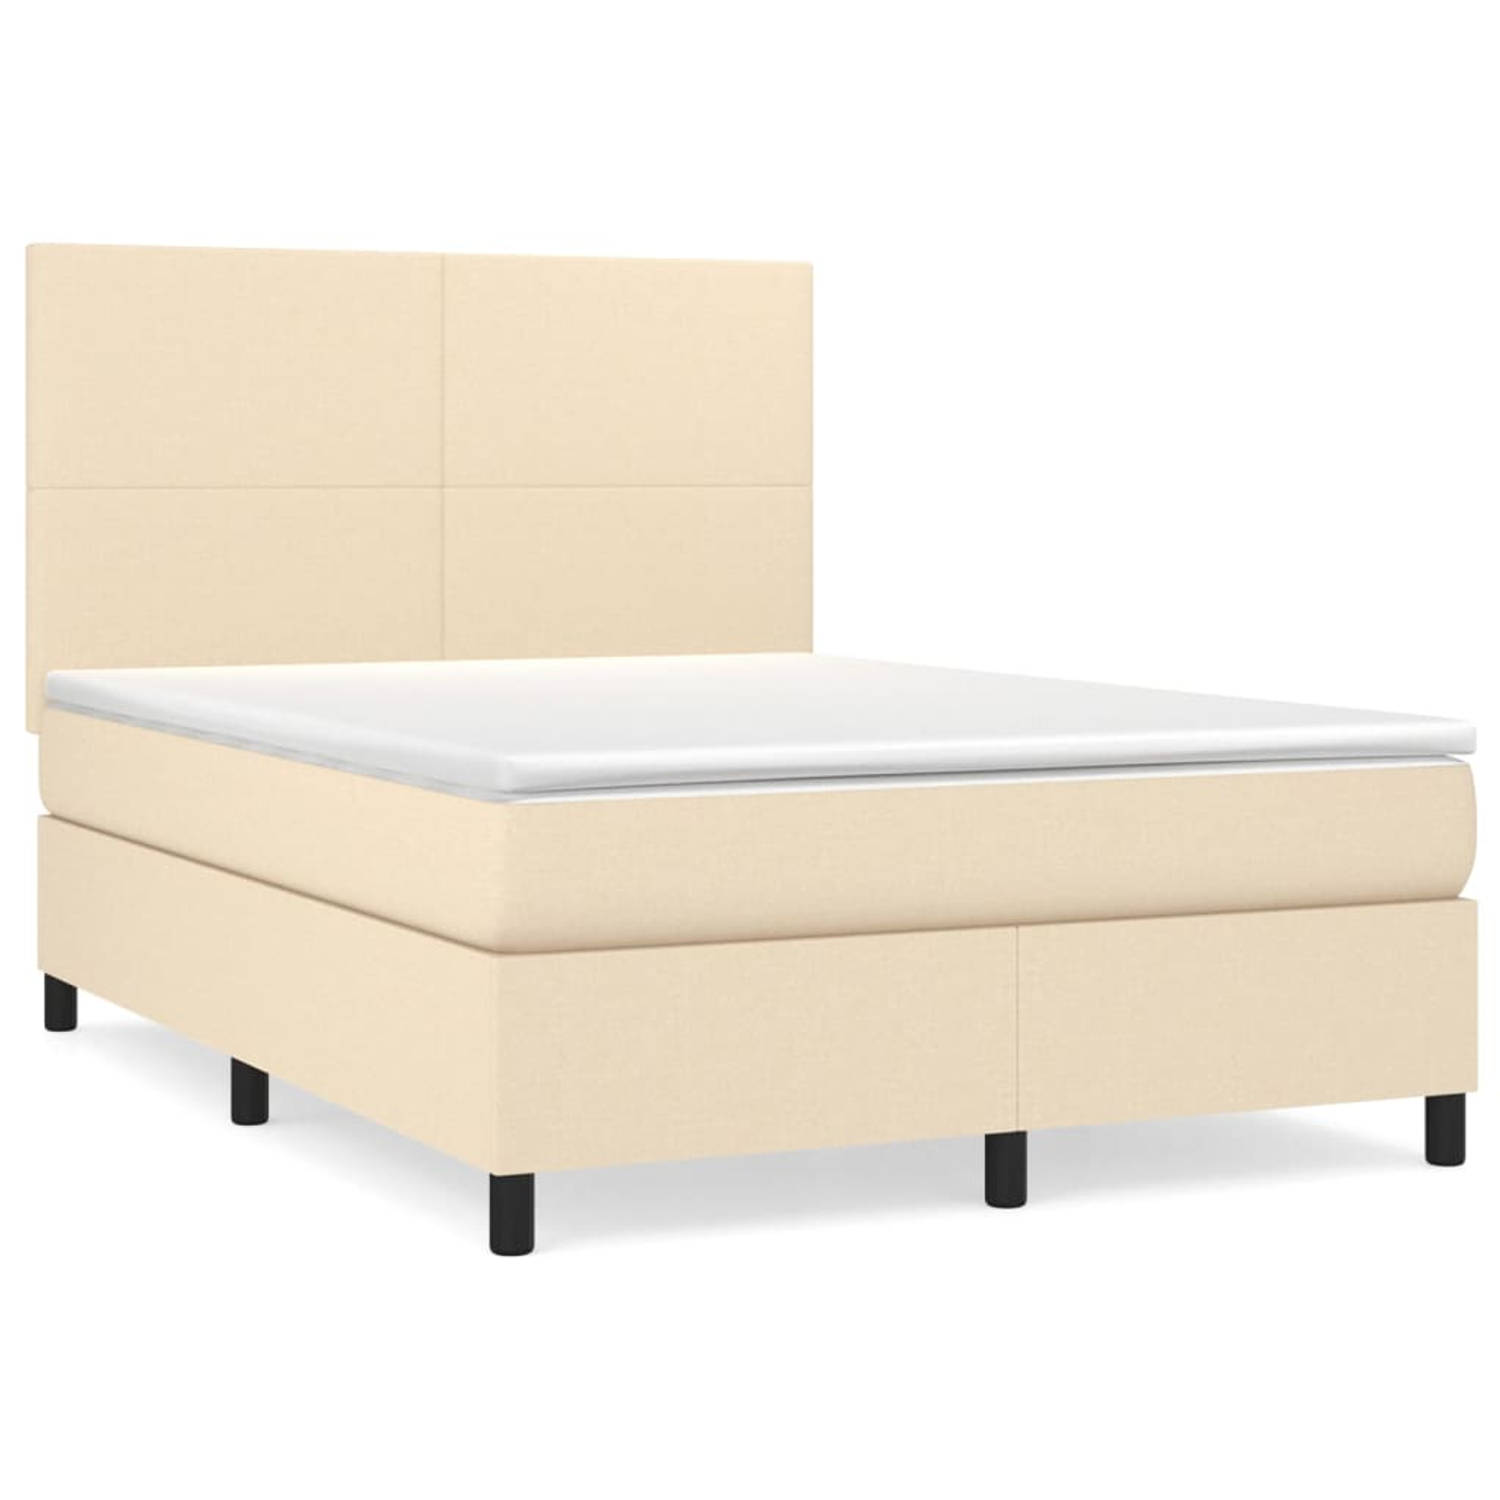 The Living Store Boxspringbed - comfort - 140 x 200 cm - Duurzaam materiaal